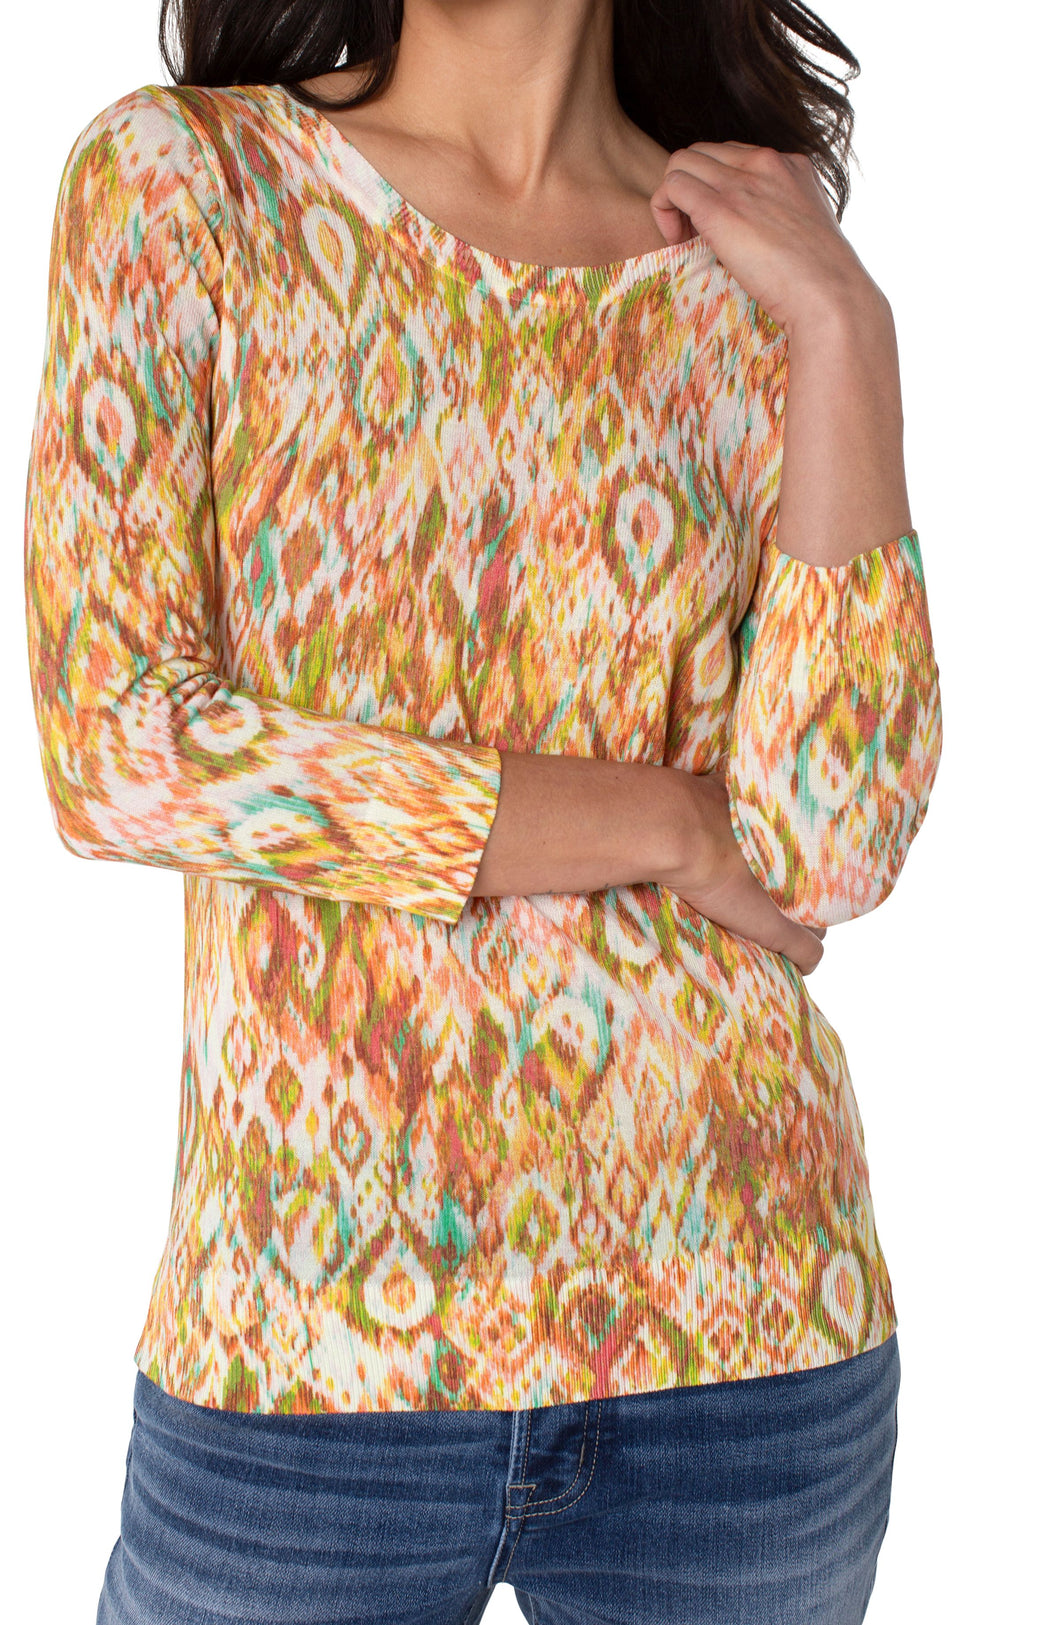 Gorgeous kaleidoscope colors really pop on this easy knit pullover sweater.  Just the perfect lightweight sweater to wear all day, you'll find pairing it with a denim jacket or blazer takes it to a whole new level.   Color-Kaleidoscope- 3/4 Sleeve. Round neck. Fabric- 88% Rayon.12% Nylon.